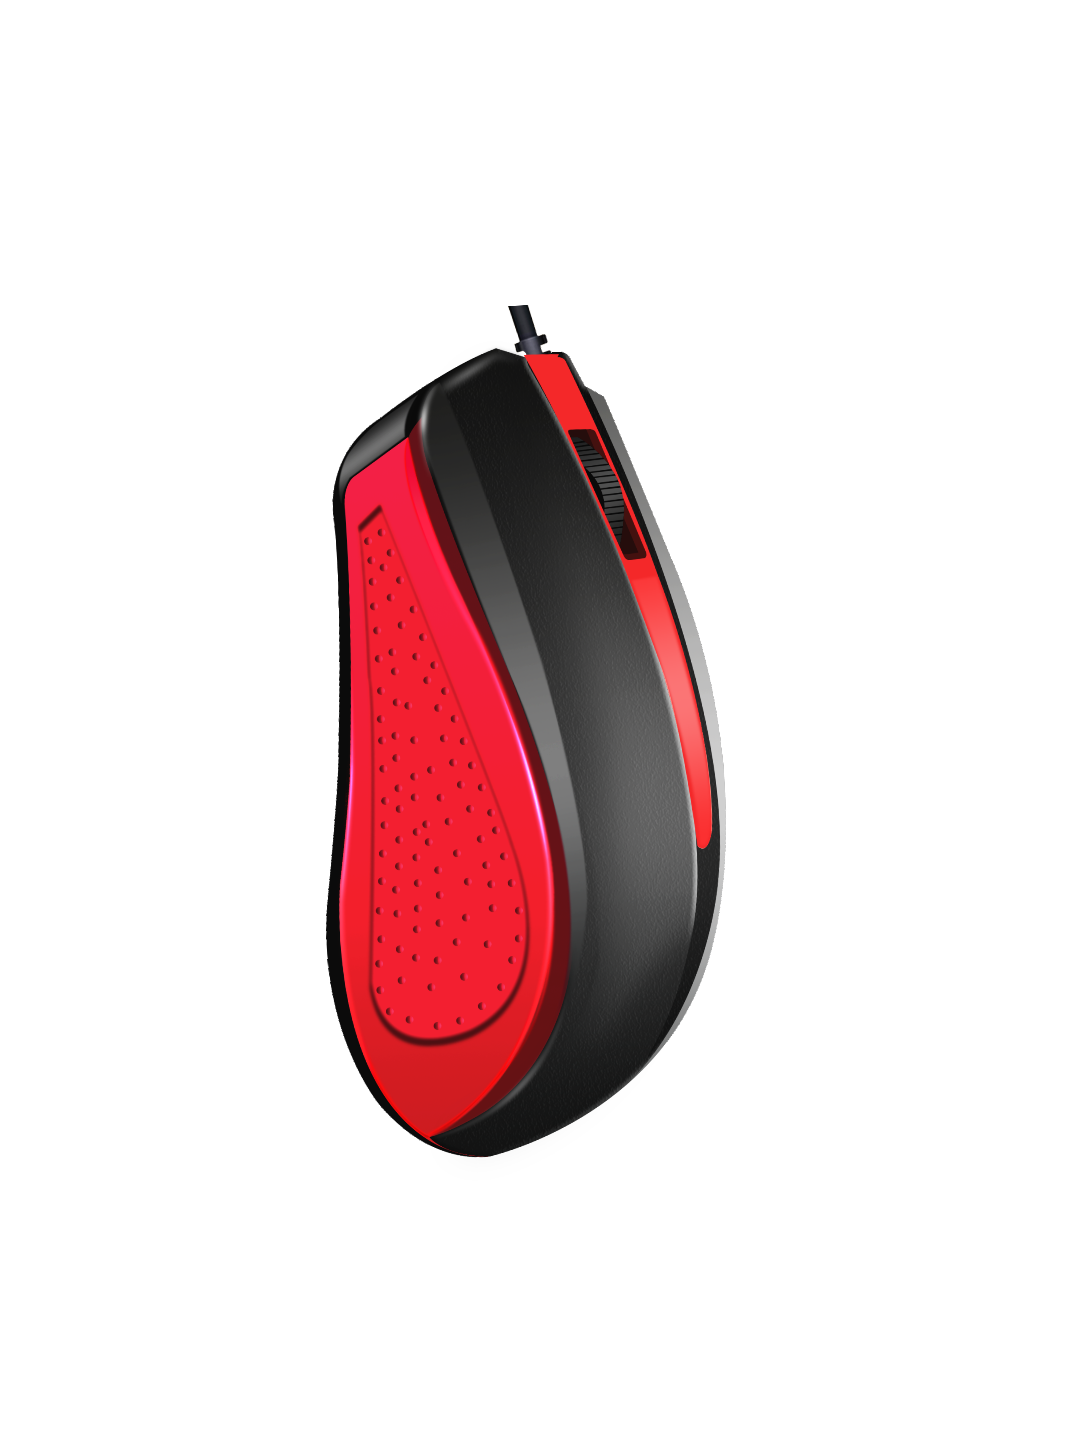 Foxin Classy-Red Wired Mouse